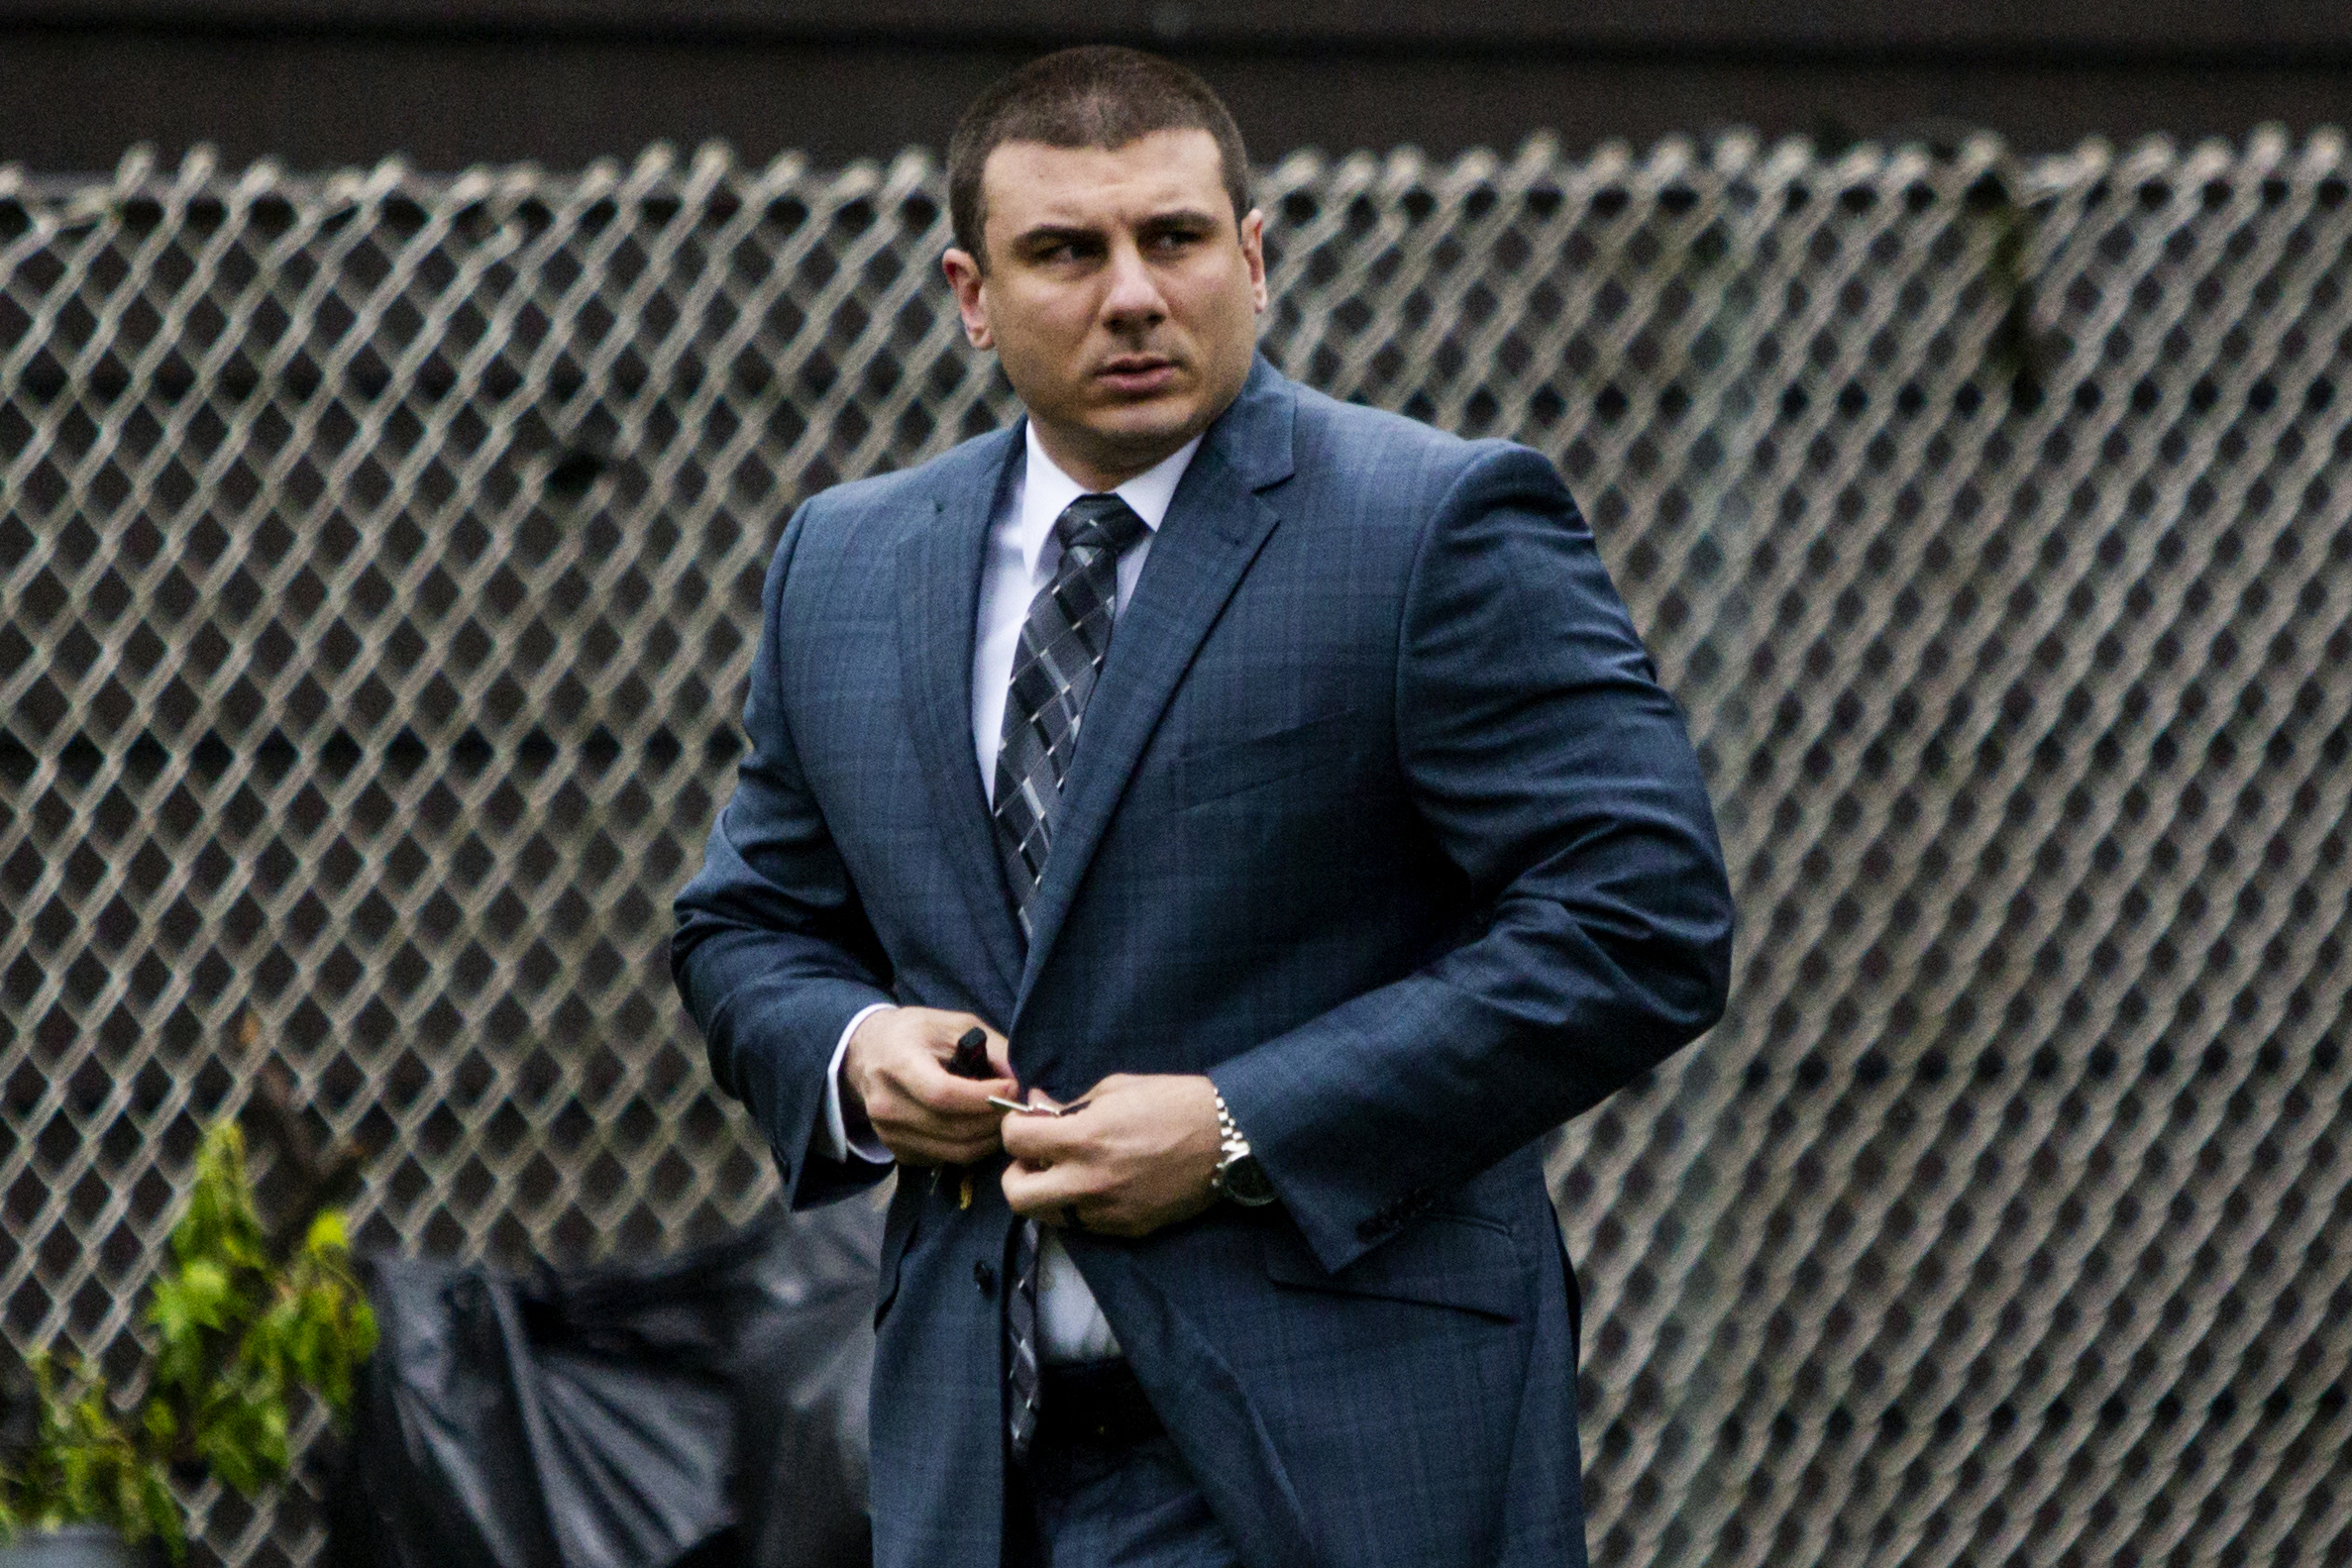 PHOTO: In this May 13, 2019, file photo, New York City police officer Daniel Pantaleo leaves his house in Staten Island, N.Y.